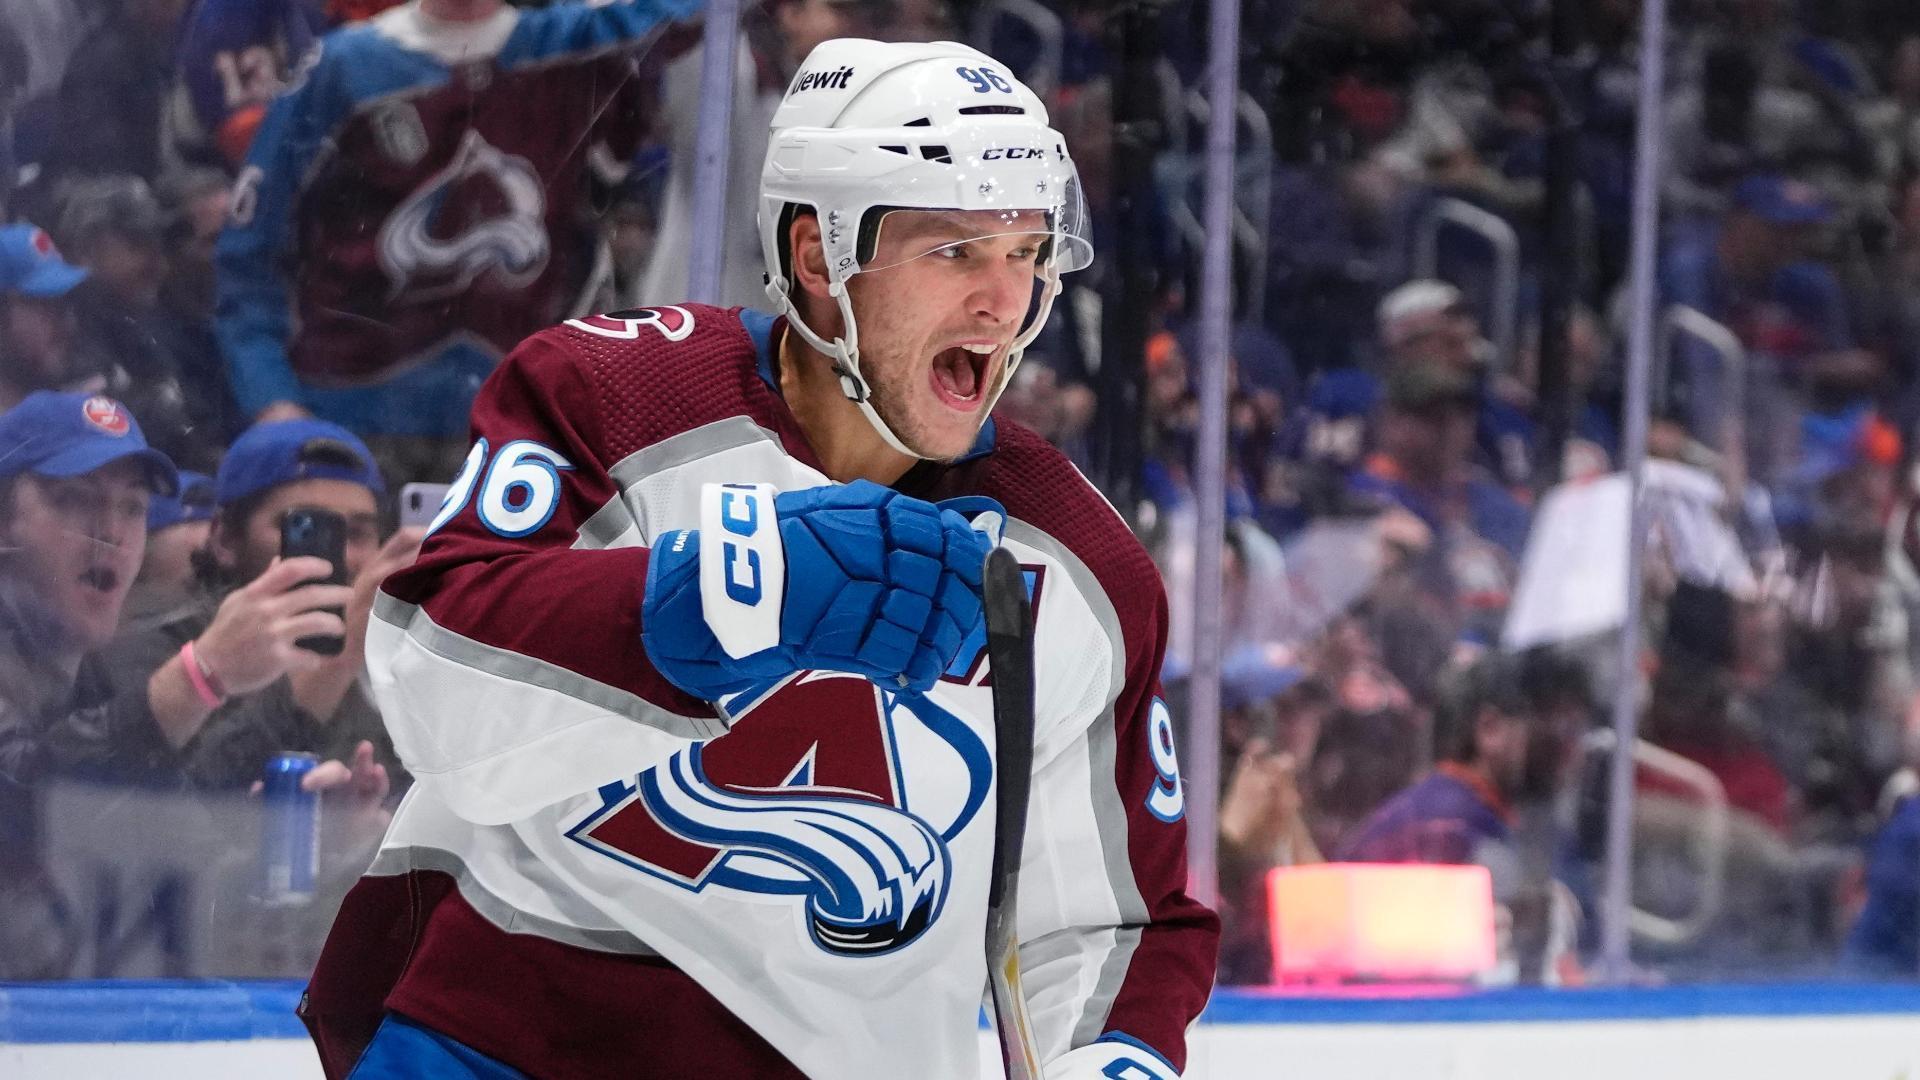 Mikko Rantanen's hat trick leads Avs past Blues in OT - The Rink Live   Comprehensive coverage of youth, junior, high school and college hockey